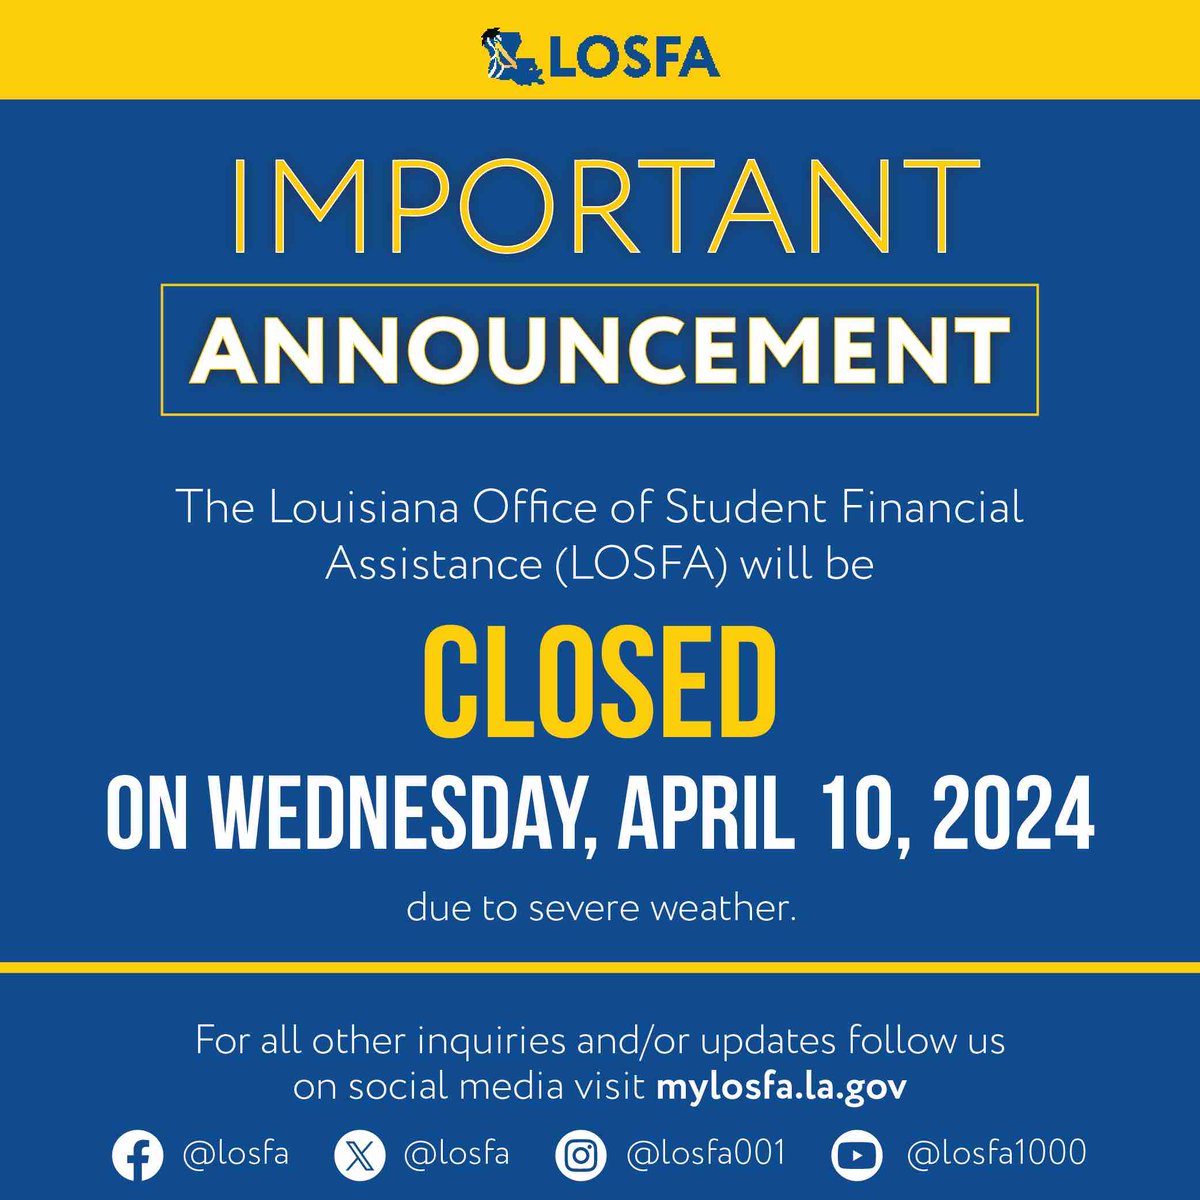 The Louisiana Office of Student Financial Assistance (LOSFA) will be closed on Wednesday, April 10, due to severe weather.